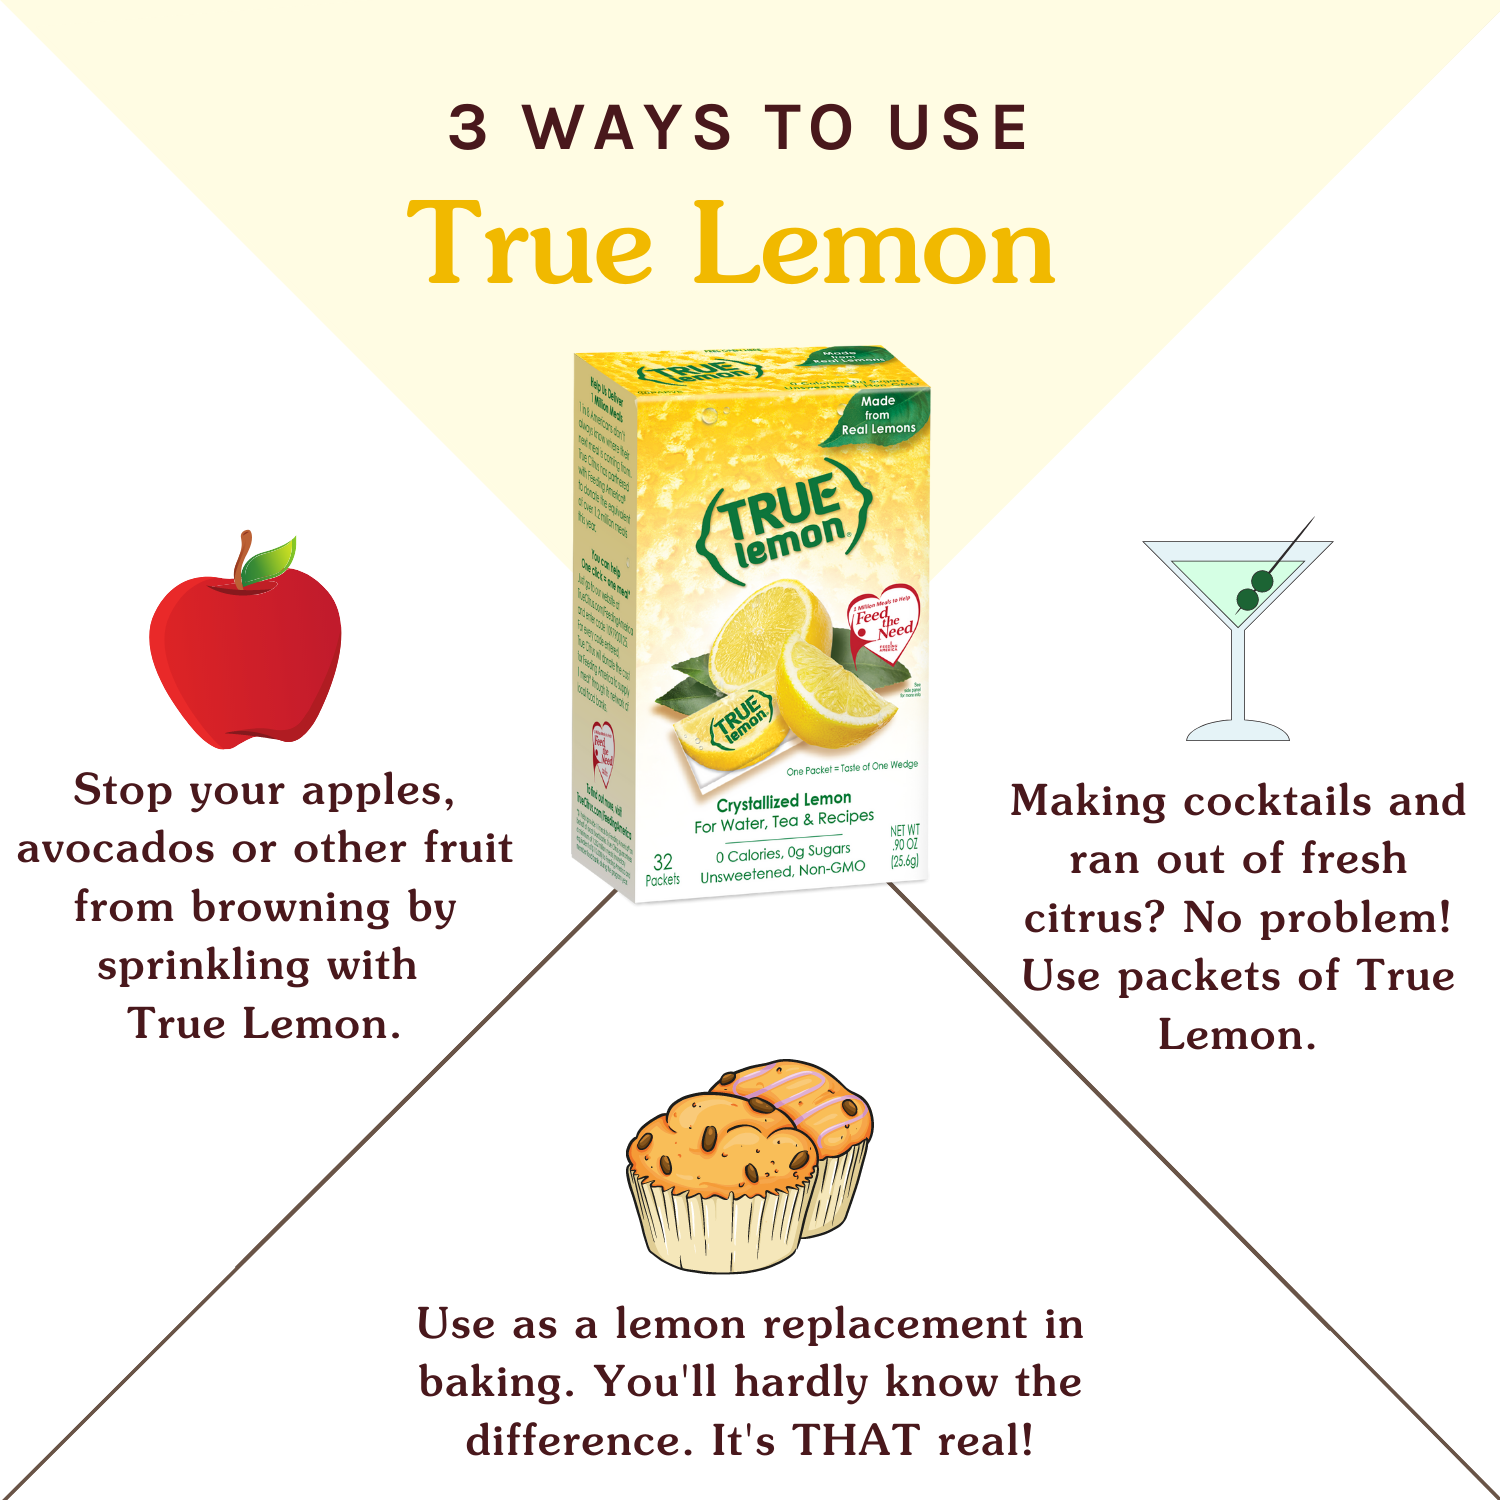 Three ways to use True Lemon: prevent fruit from browning, use for cocktail flavorings, use as lemon replacement in baking, 